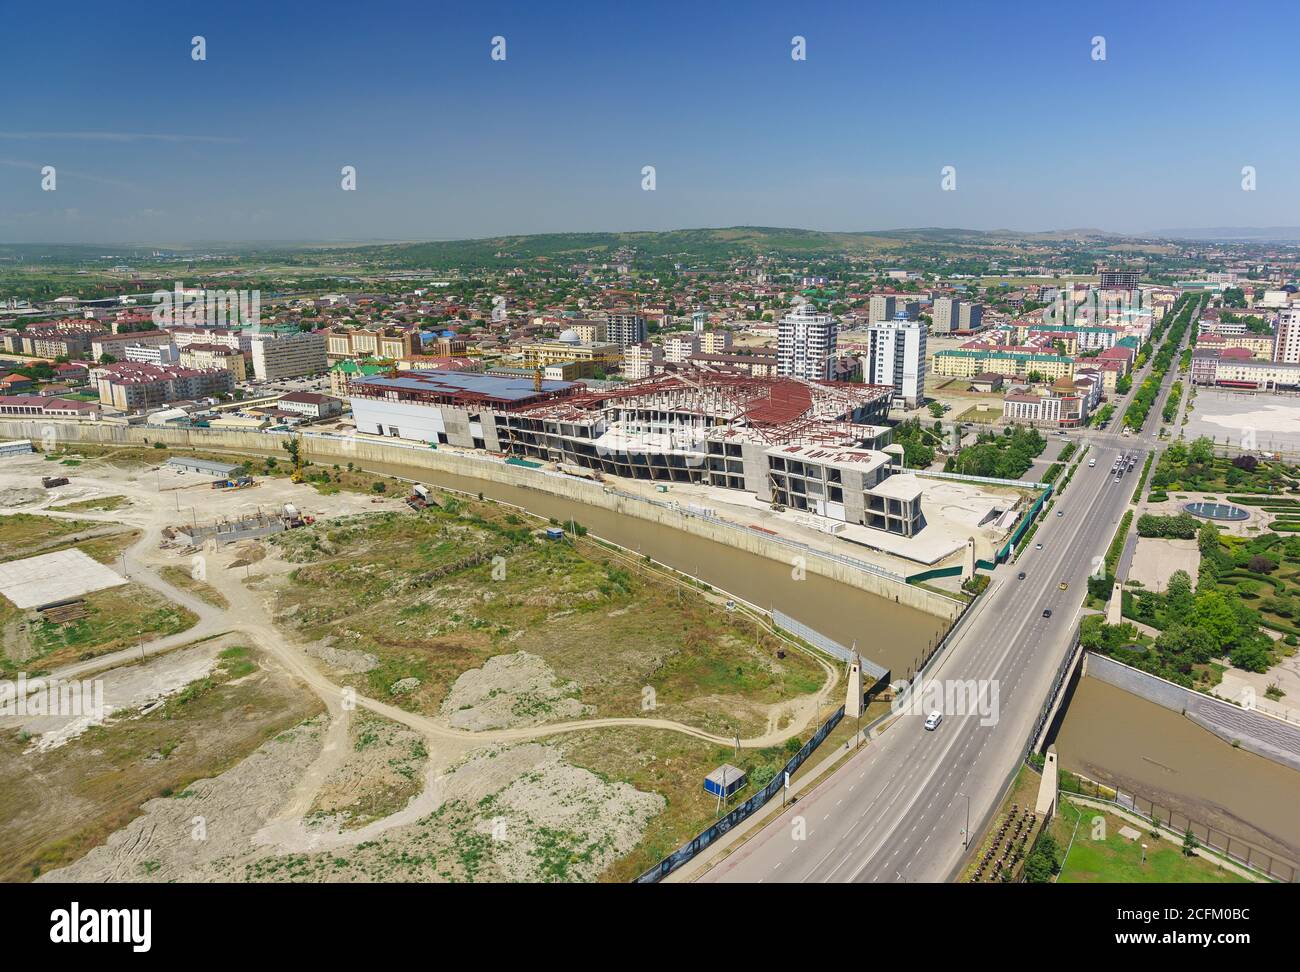 Grozny, Chechen, Russia - June 02, 2019: View from the observation deck of the Grozny city high-rise complex to the construction of the Akhmat tower a Stock Photo